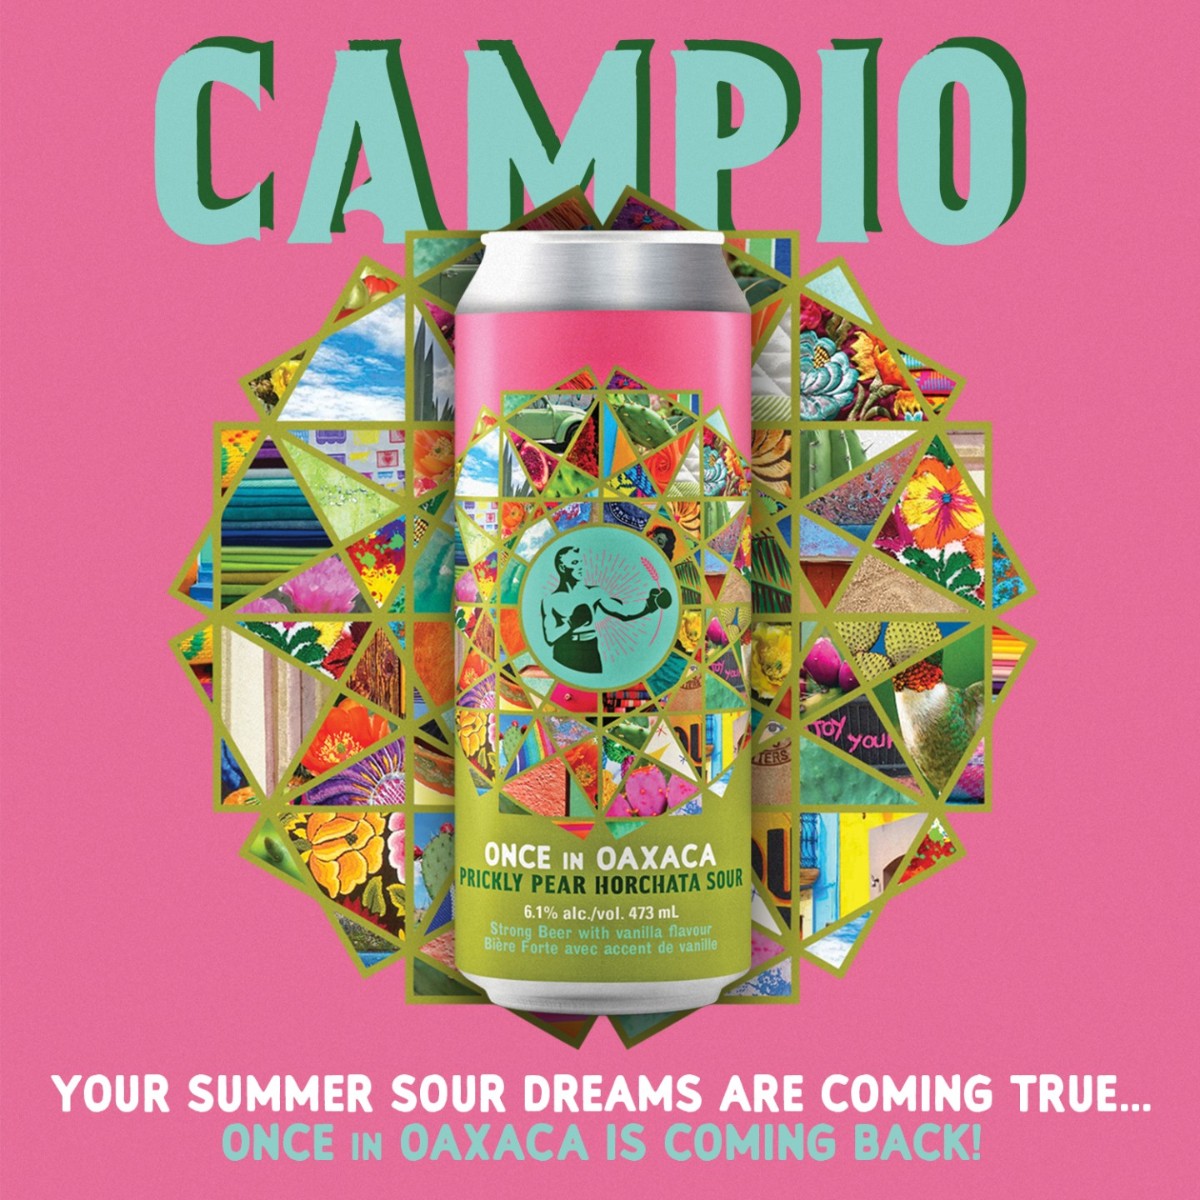 The wait is almost over! Once in Oaxaca Prickly Pear Horchata Sour will soon be back in your hands (and fridge) 🍻 Once in Oaxaca takes inspiration from a fluorescent pink street drink in Oaxaca, Mexico: Horchata. Perfect for dreaming up your next vacation (or staycation).